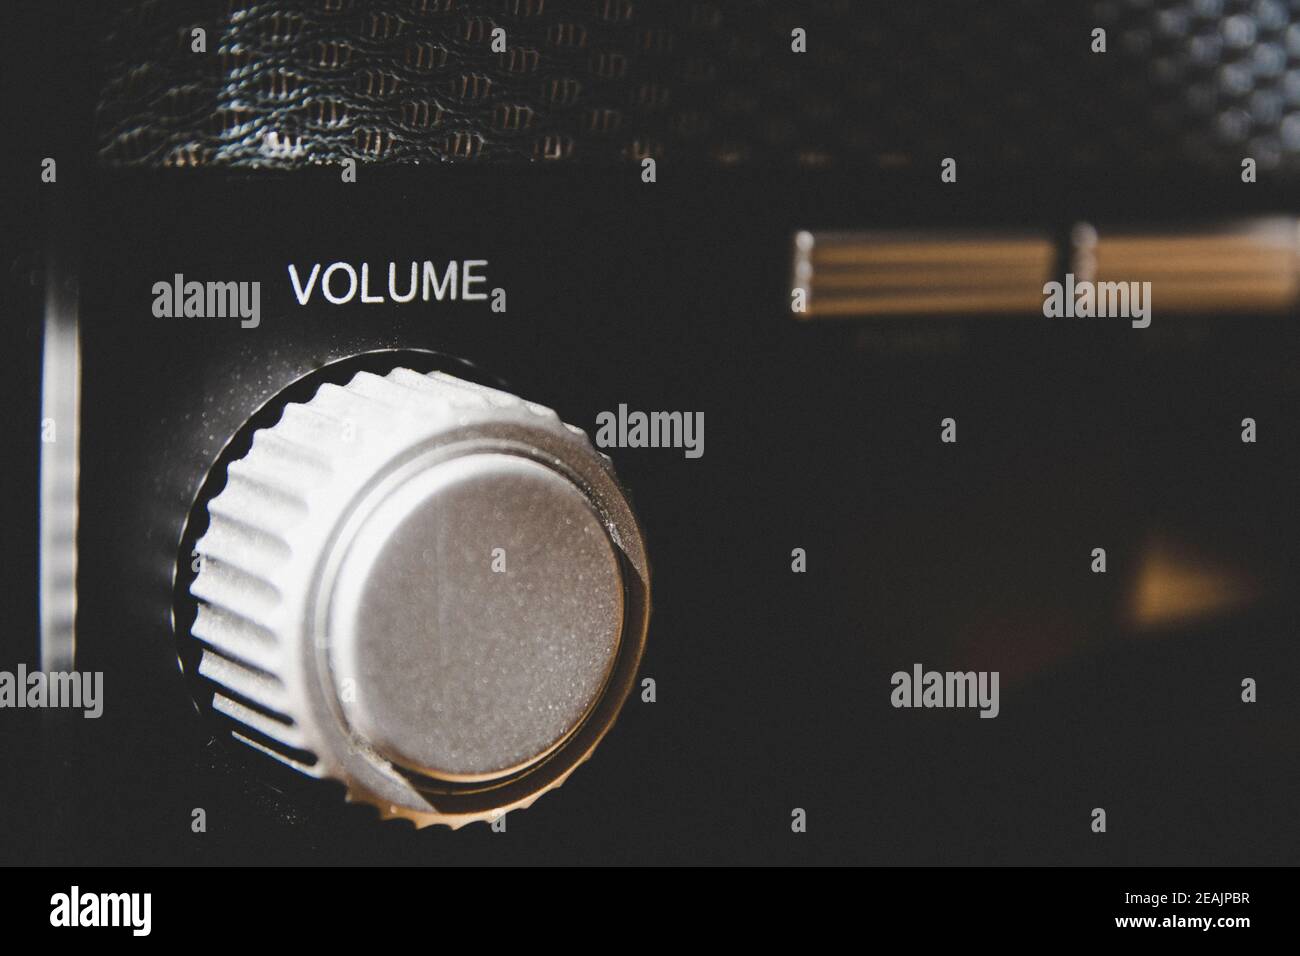 Volume wheel on an old and vintage analog radio. Close-up and detail. Copy Space. Stock Photo